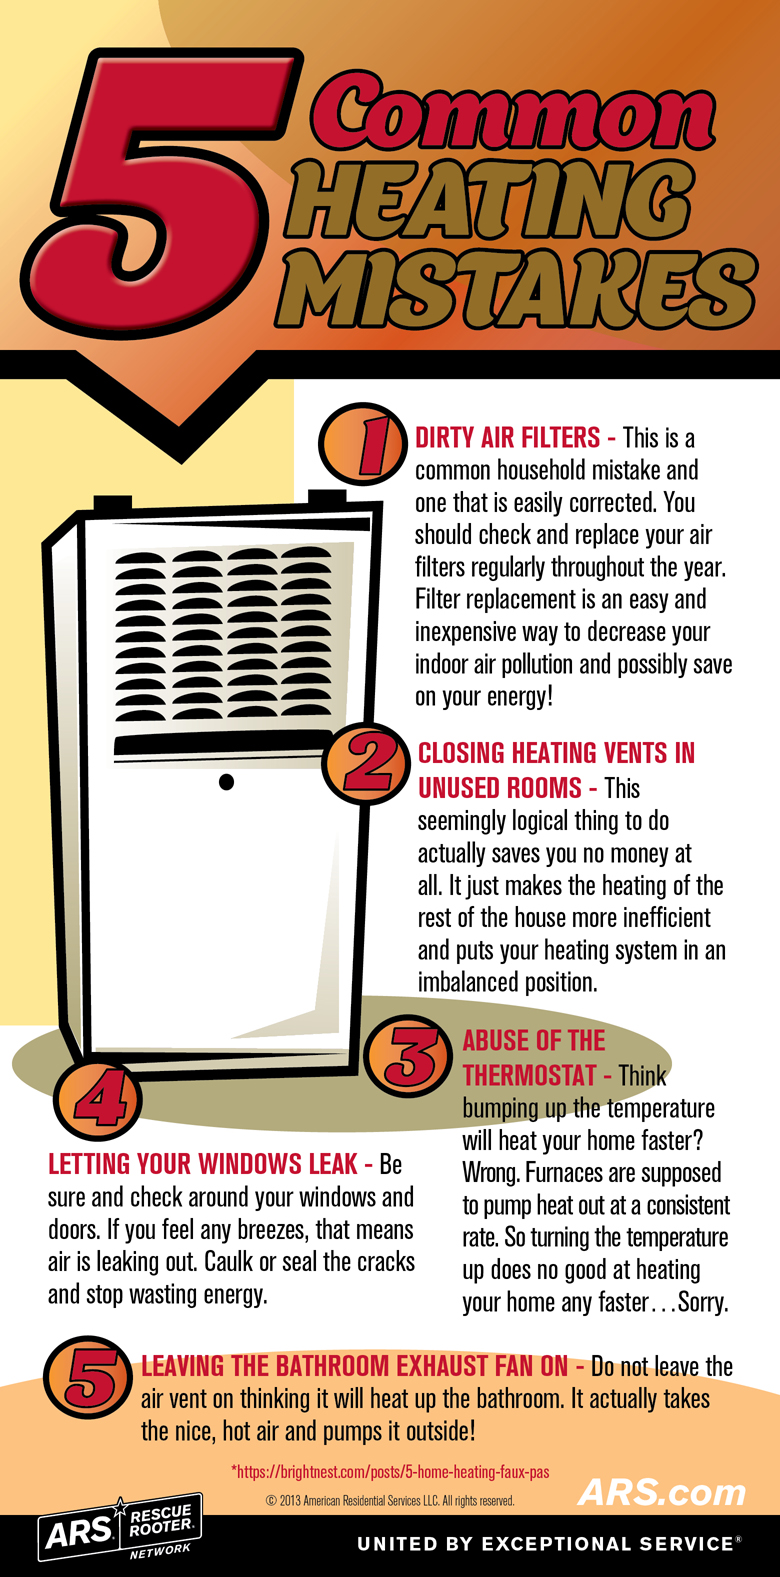 5 common heating mistakes